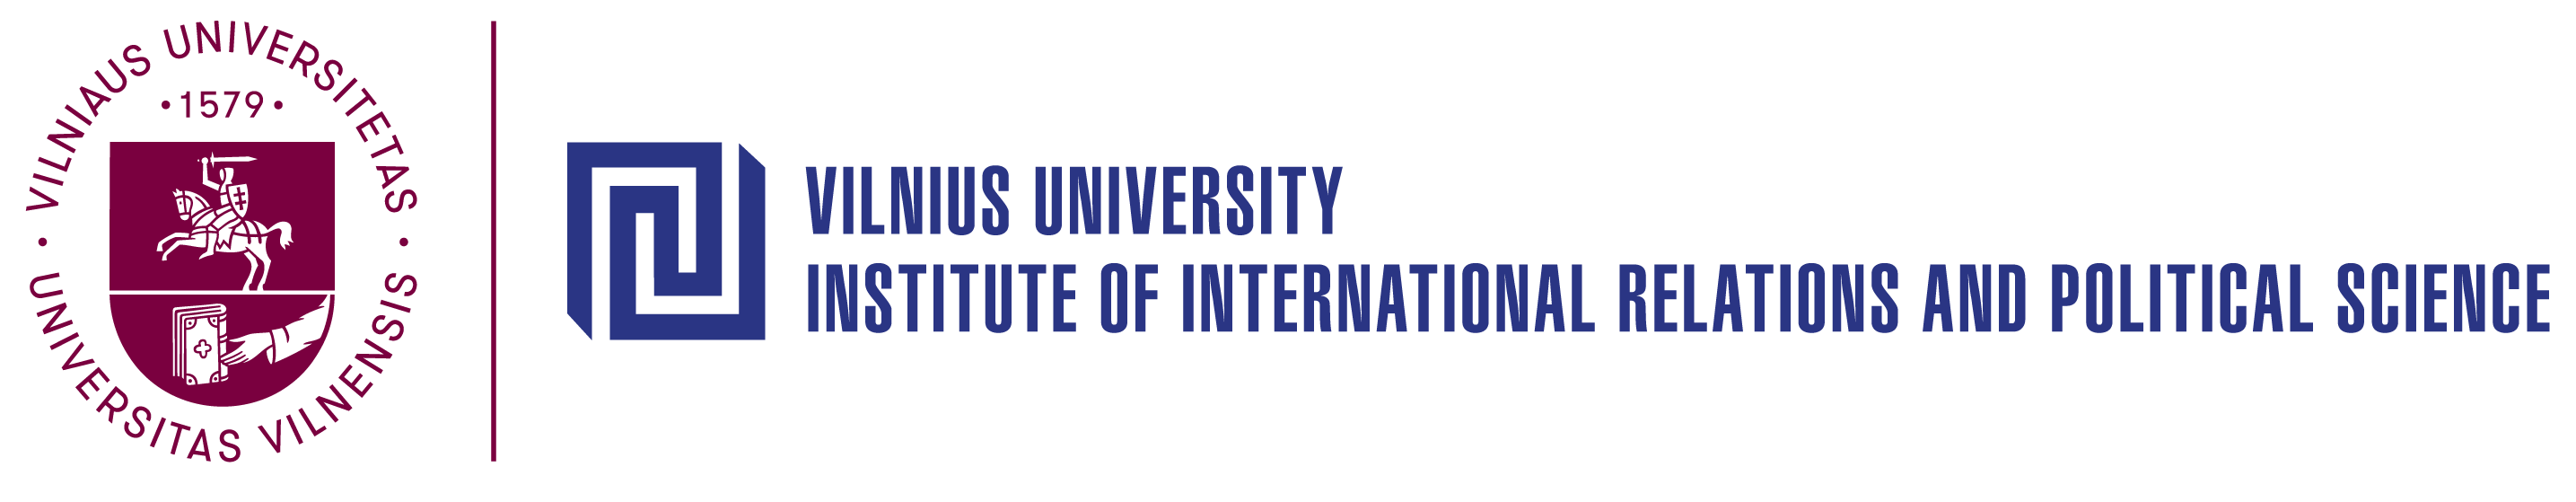 Institute of International Relations and Political Science of the Vilnius University  logo